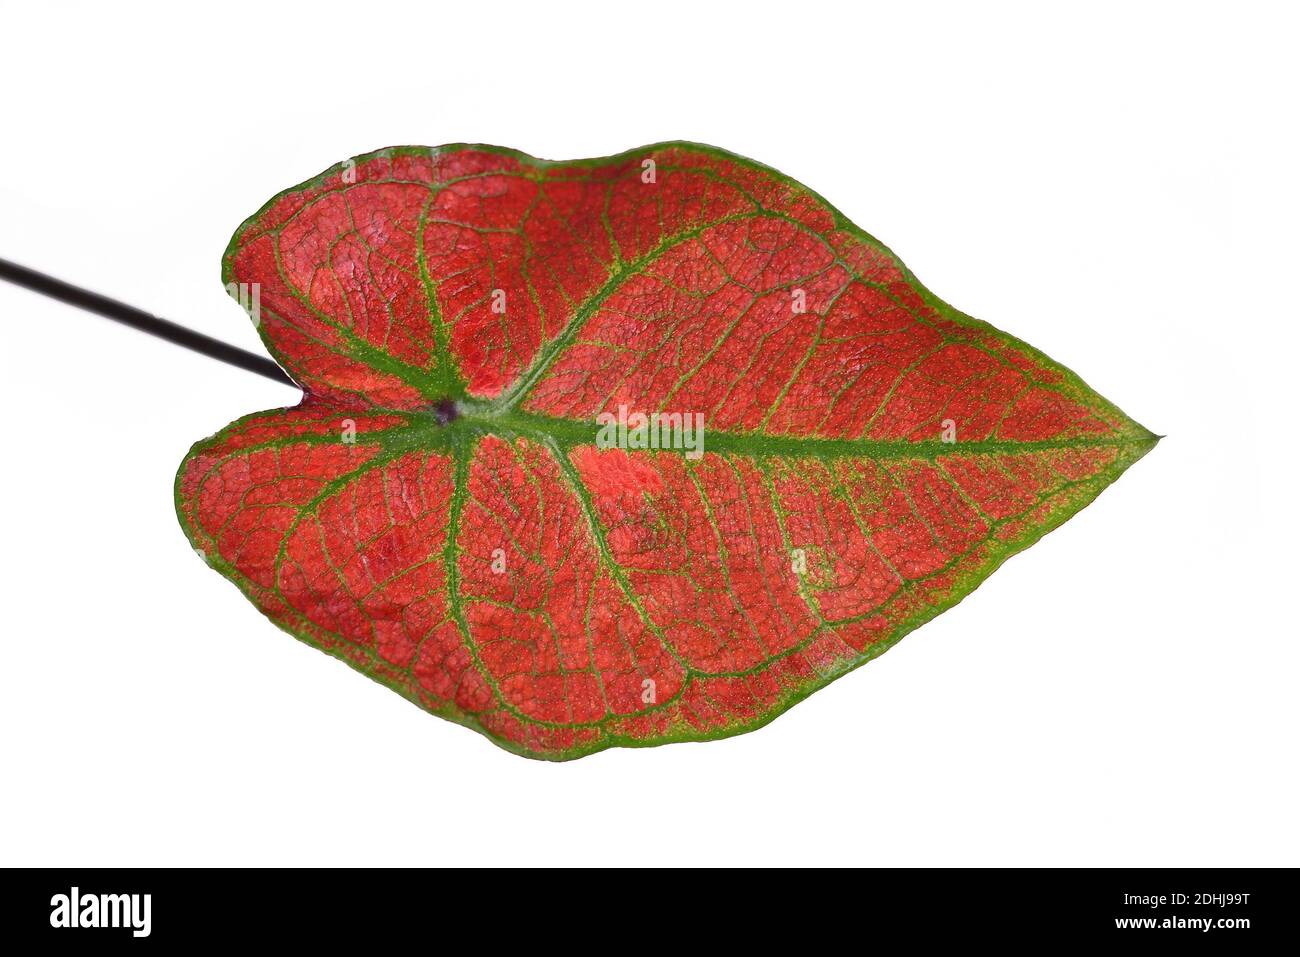 Close up of leaf of exotic 'Caladium Thai Danasty' houseplant with red leaves and green veins isolated on white background Stock Photo